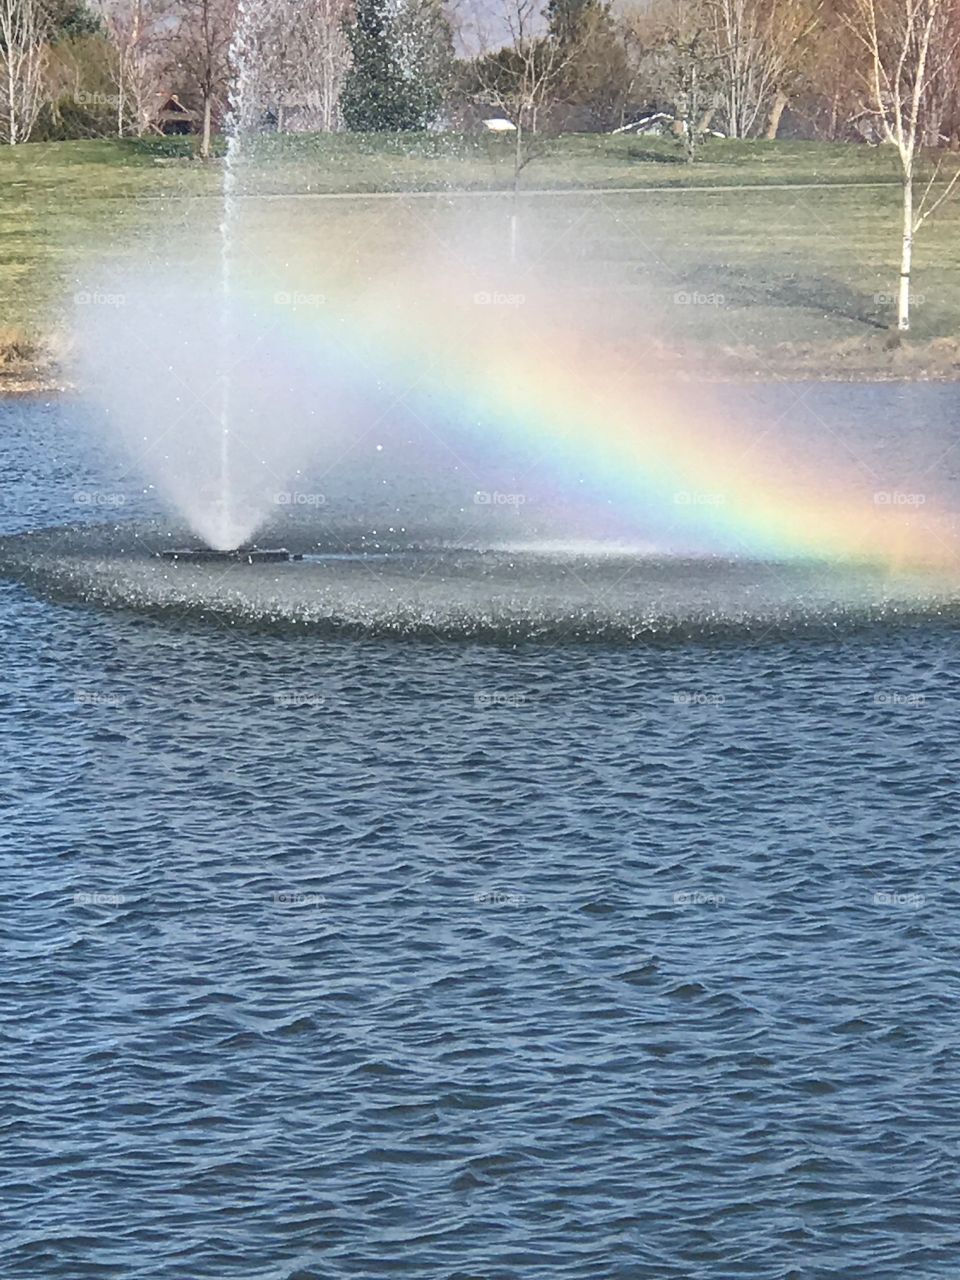 Photo taken at a local park. The light reflected from the water made this stunning rainbow. 